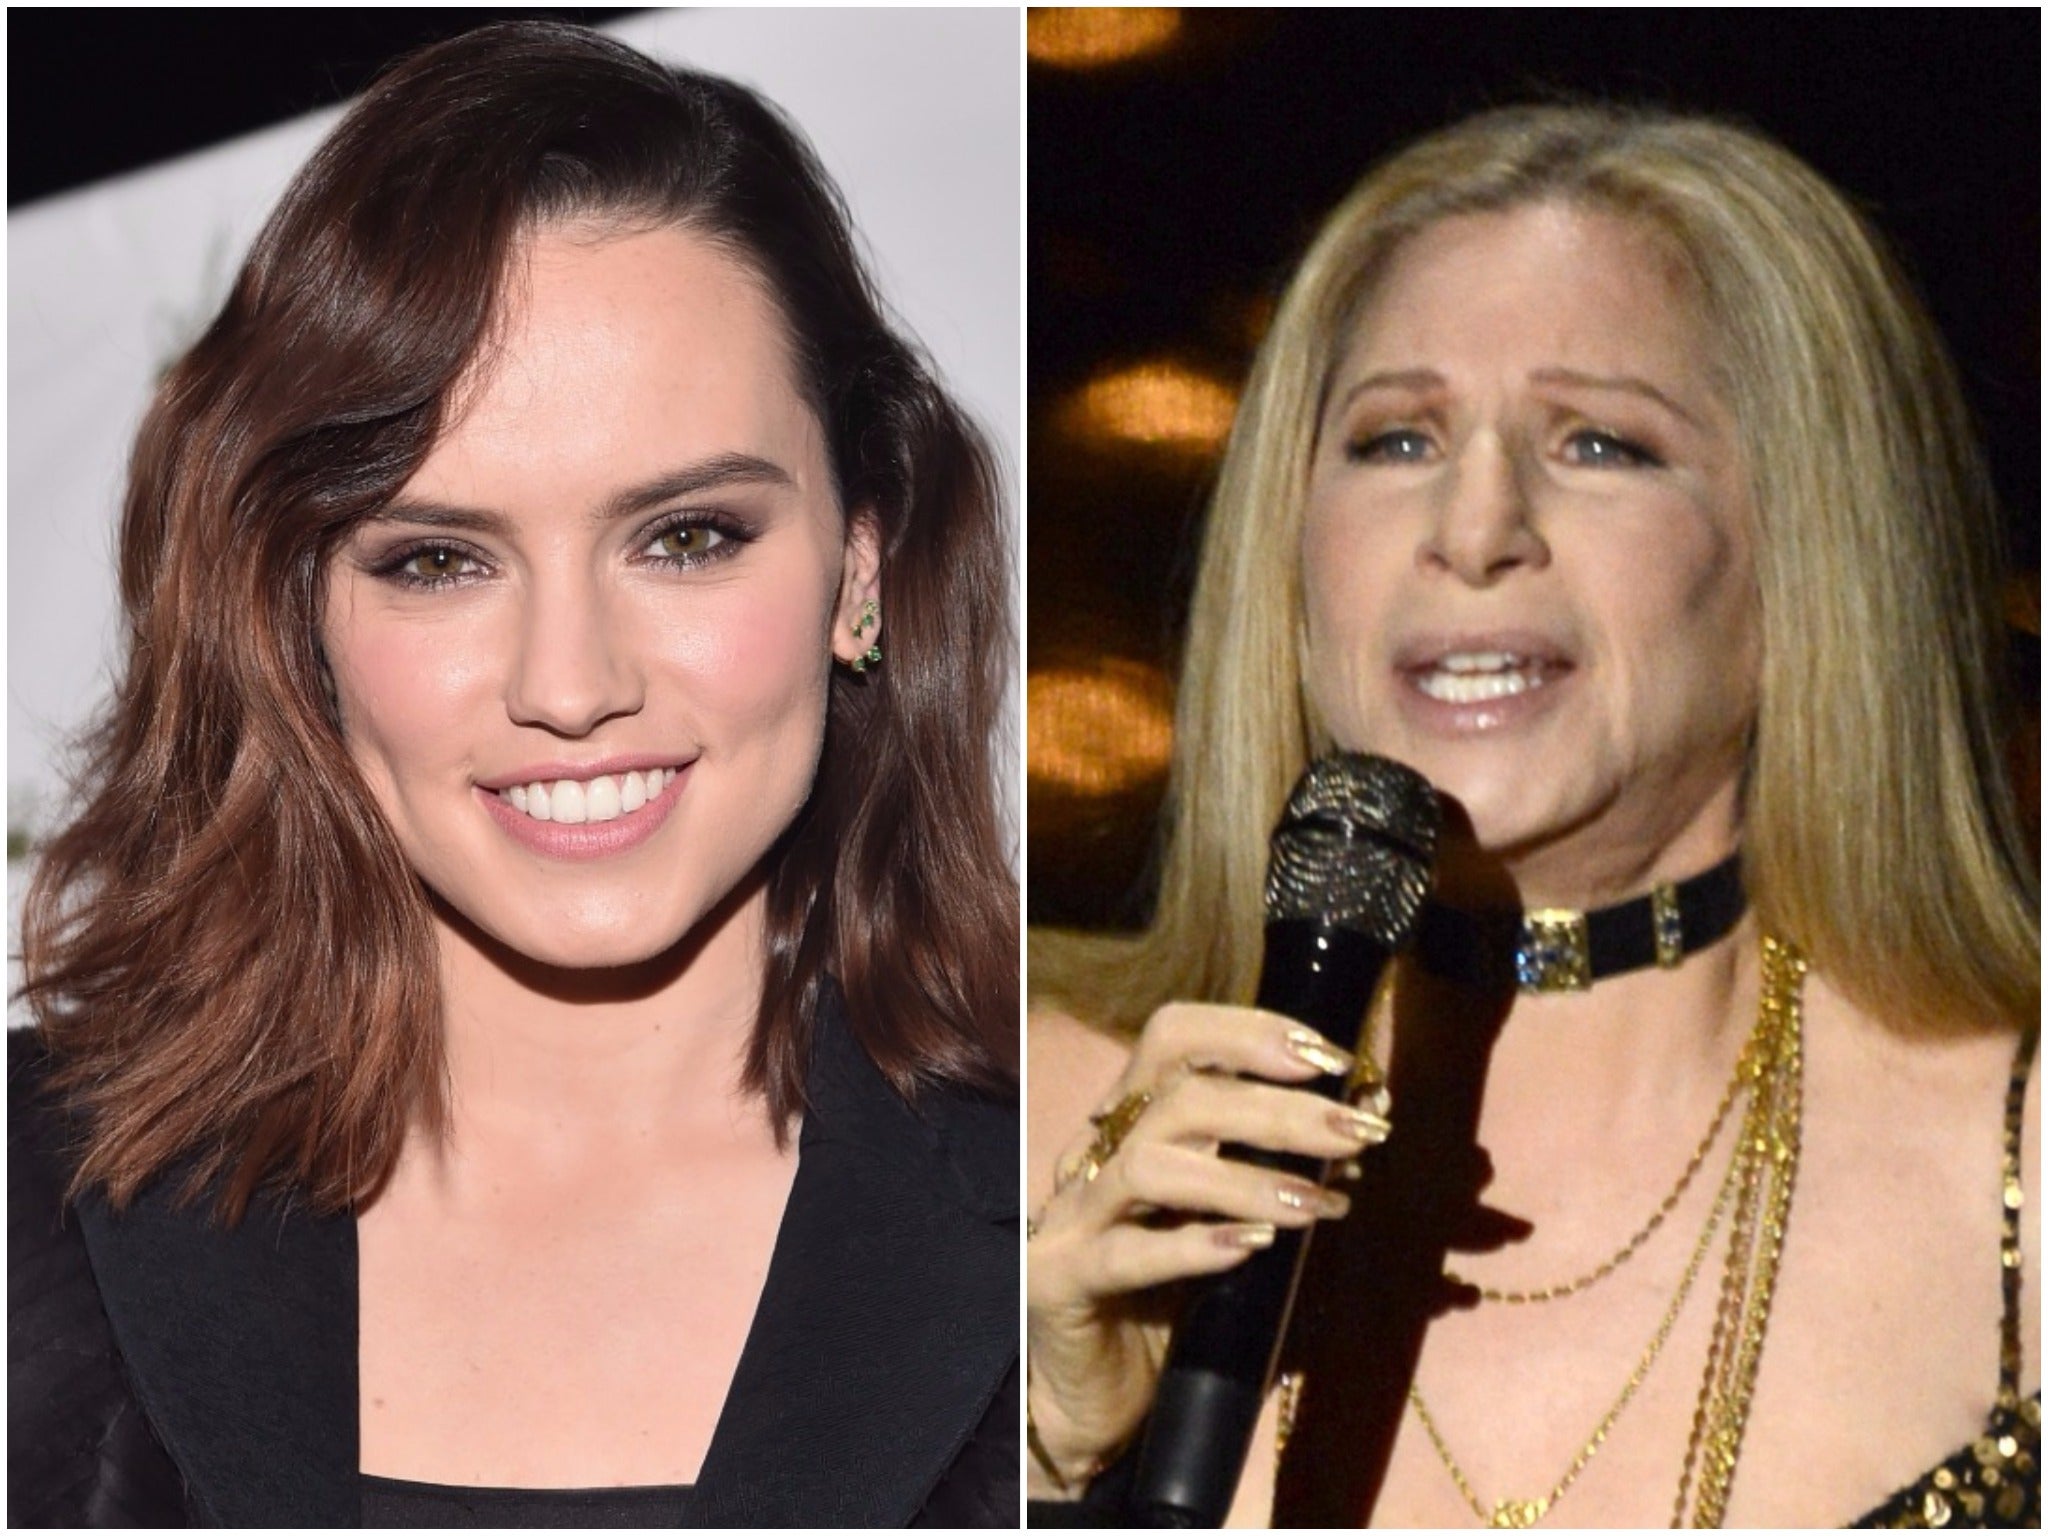 Daisy Ridley and Barbra Streisand hopefully releasing a mixtape within the year